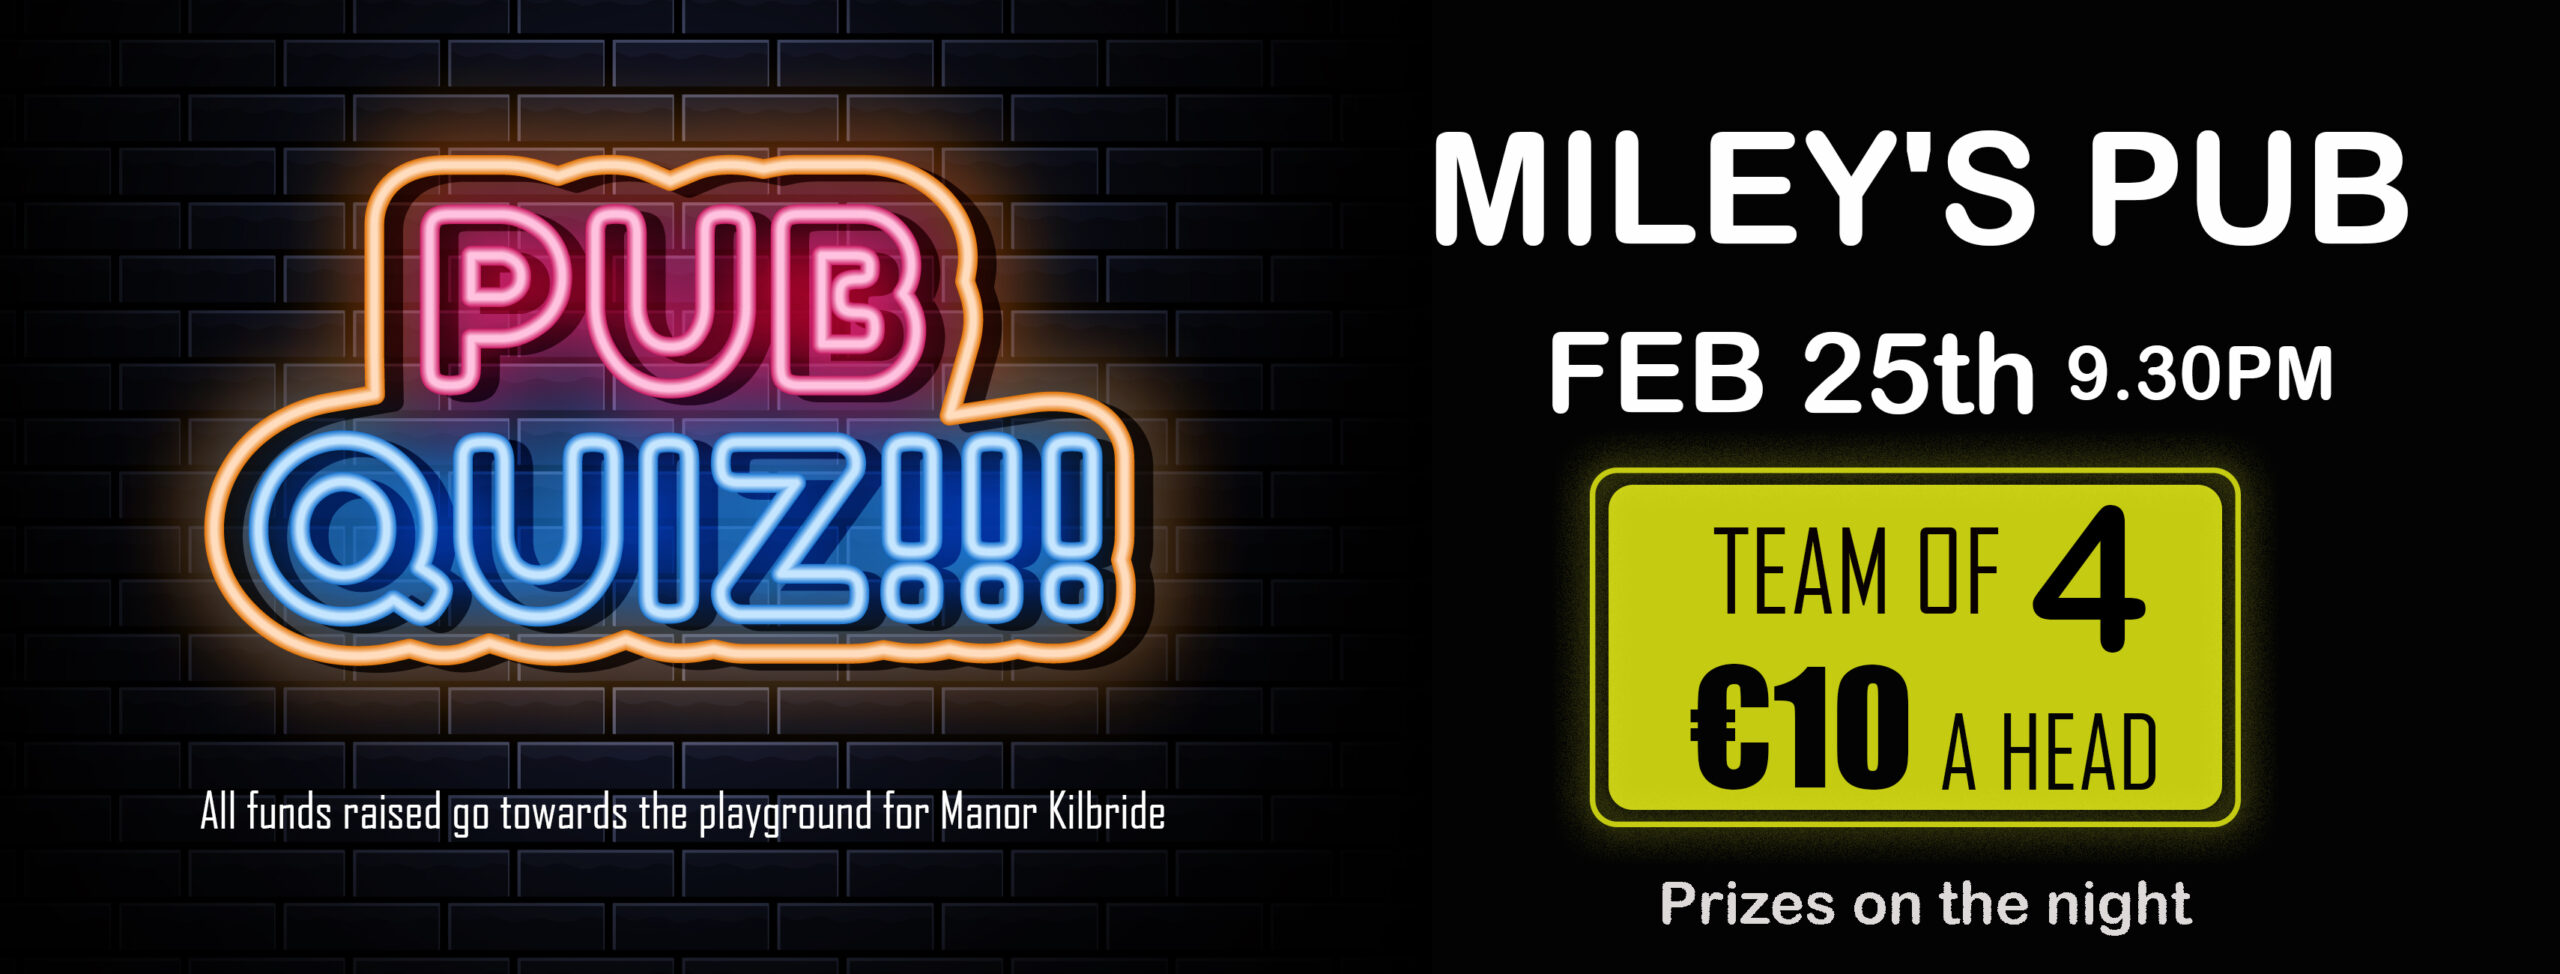 Quiz Night in Miley's Pub on Saturday the 25th of February from 9.30PM - All Welcome